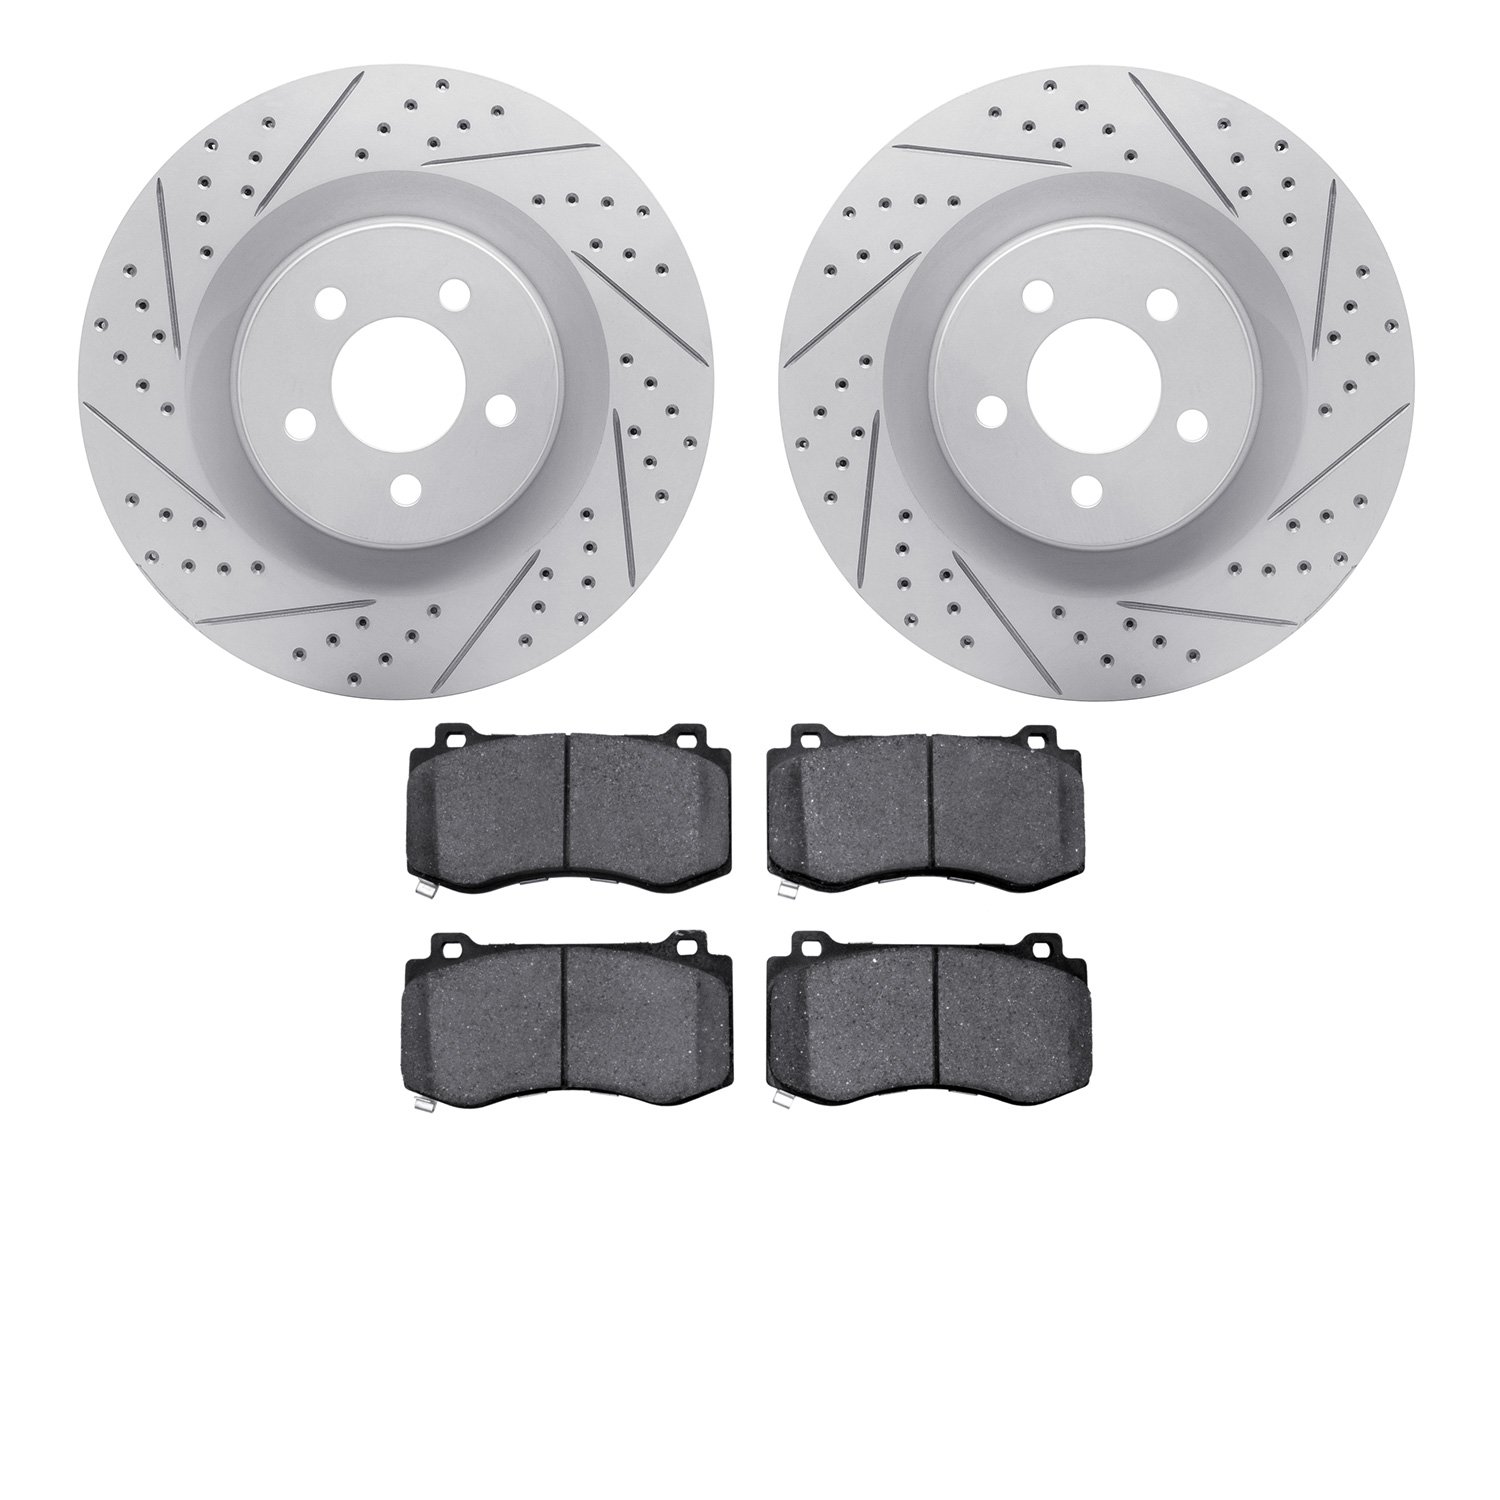 2602-39000 Geoperformance Drilled/Slotted Rotors w/5000 Euro Ceramic Brake Pads Kit, Fits Select Mopar, Position: Front